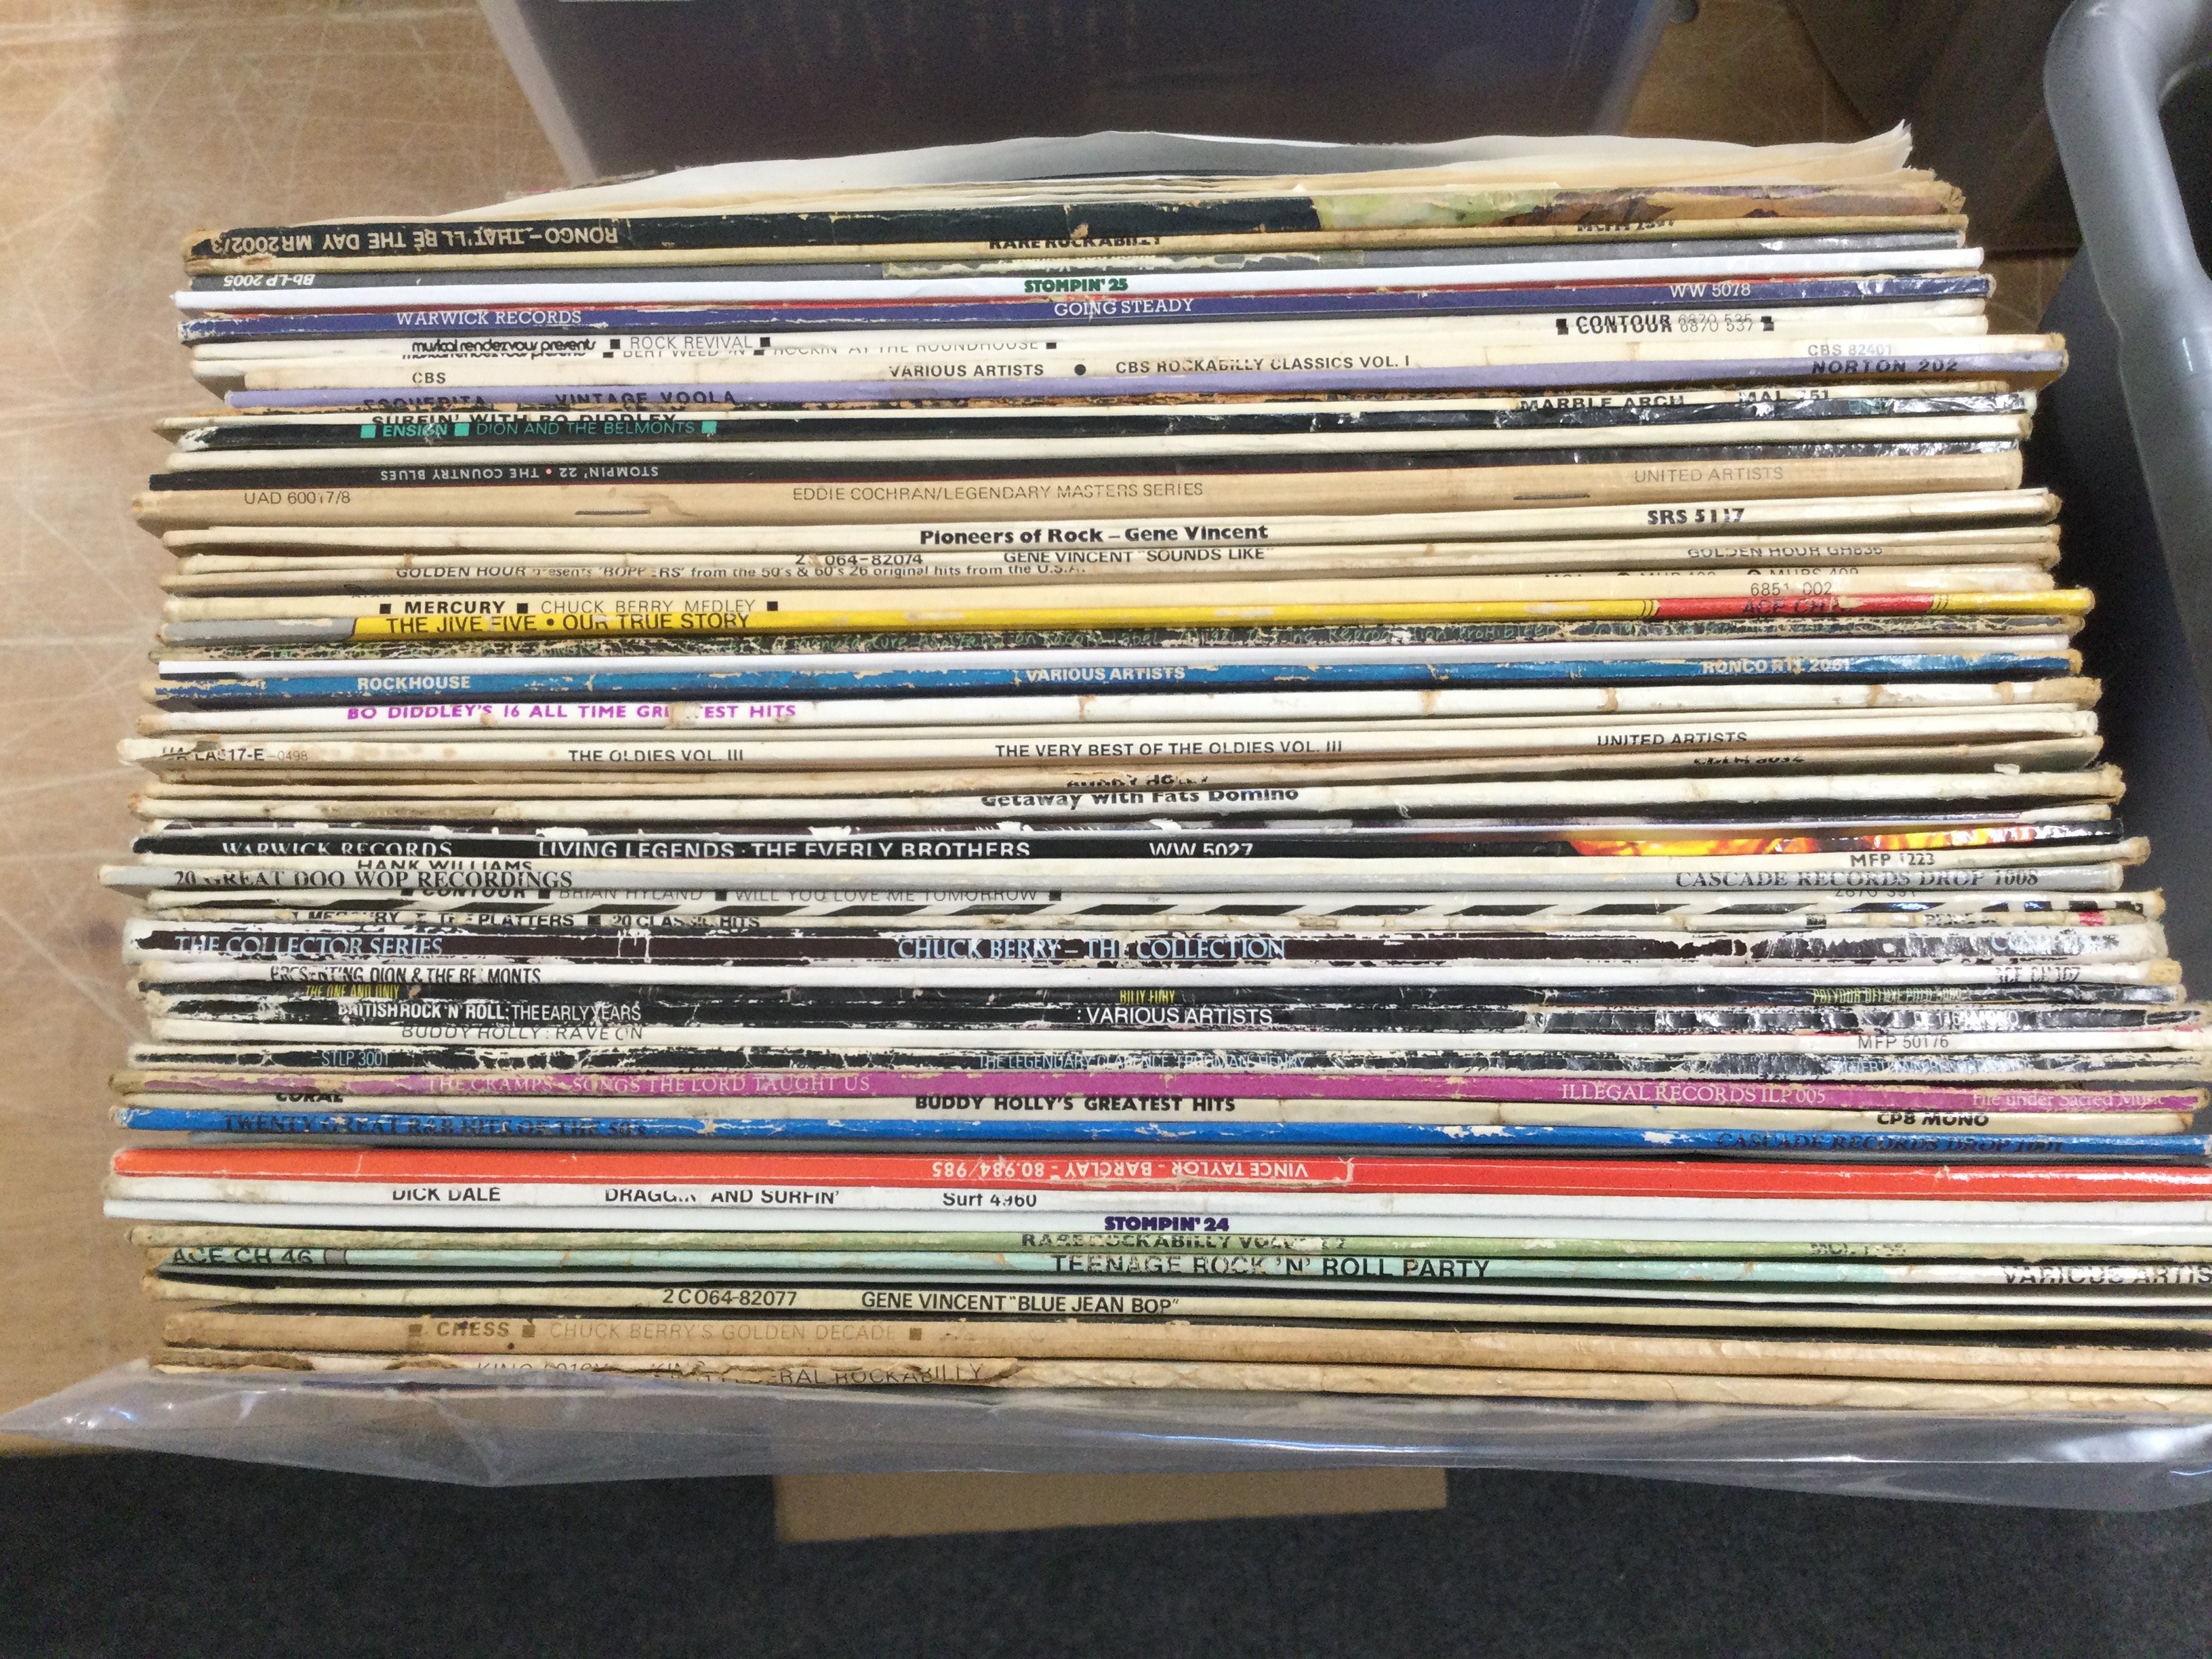 A box of rock n roll and rockabilly LPs by various